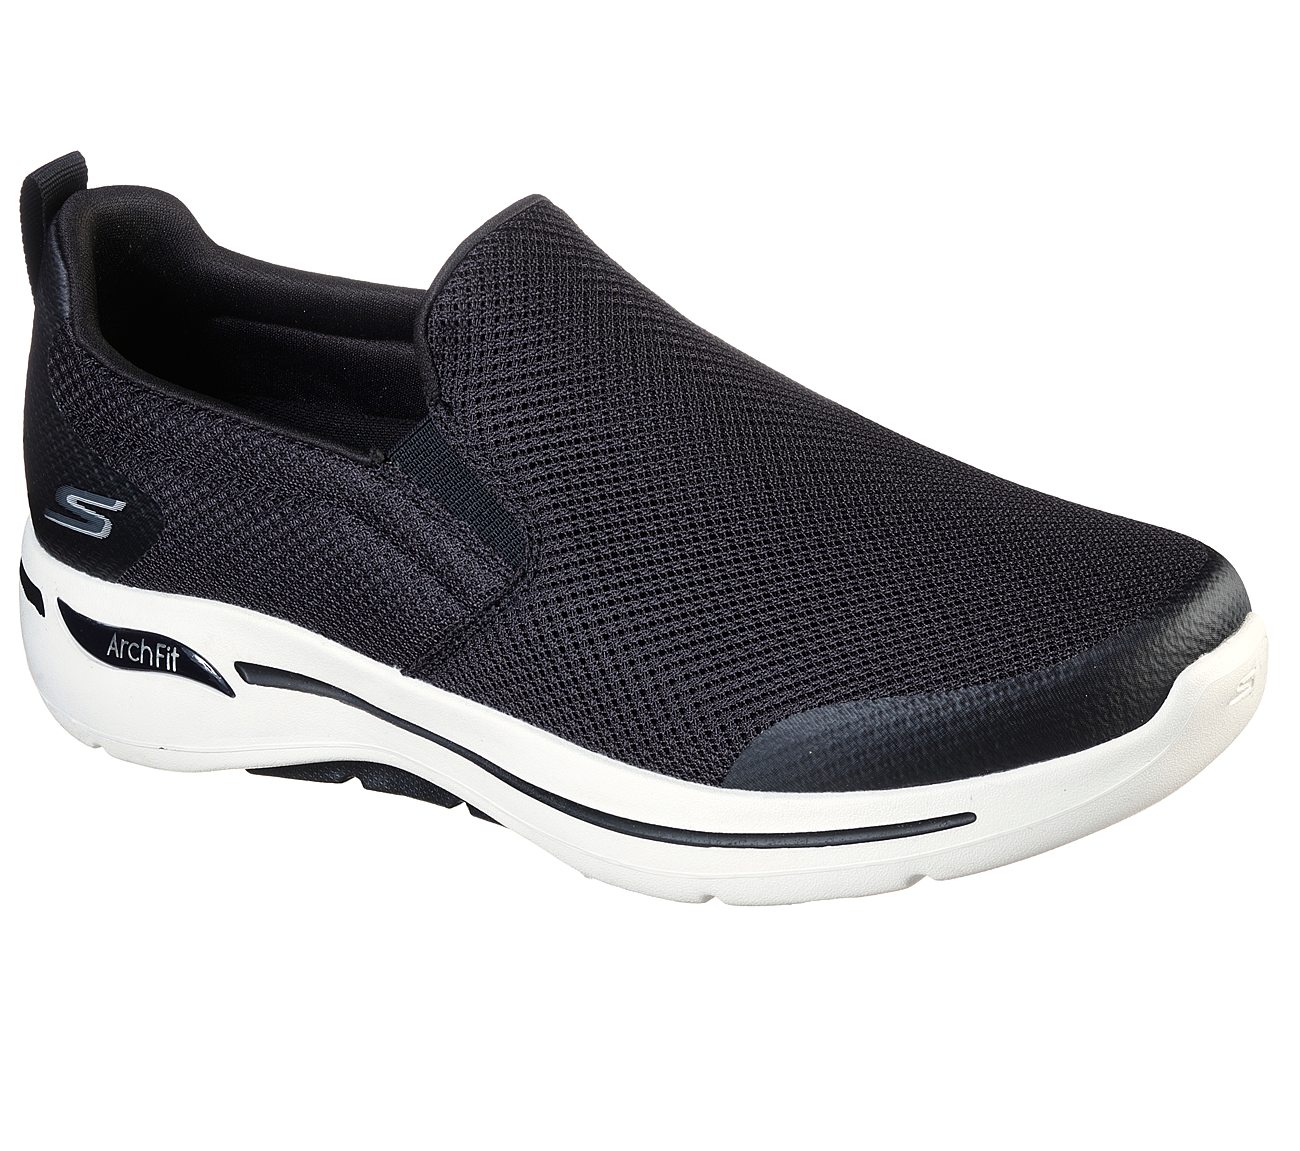 Skechers Women's Go Walk Arch Fit-Iconic Sneaker | lupon.gov.ph